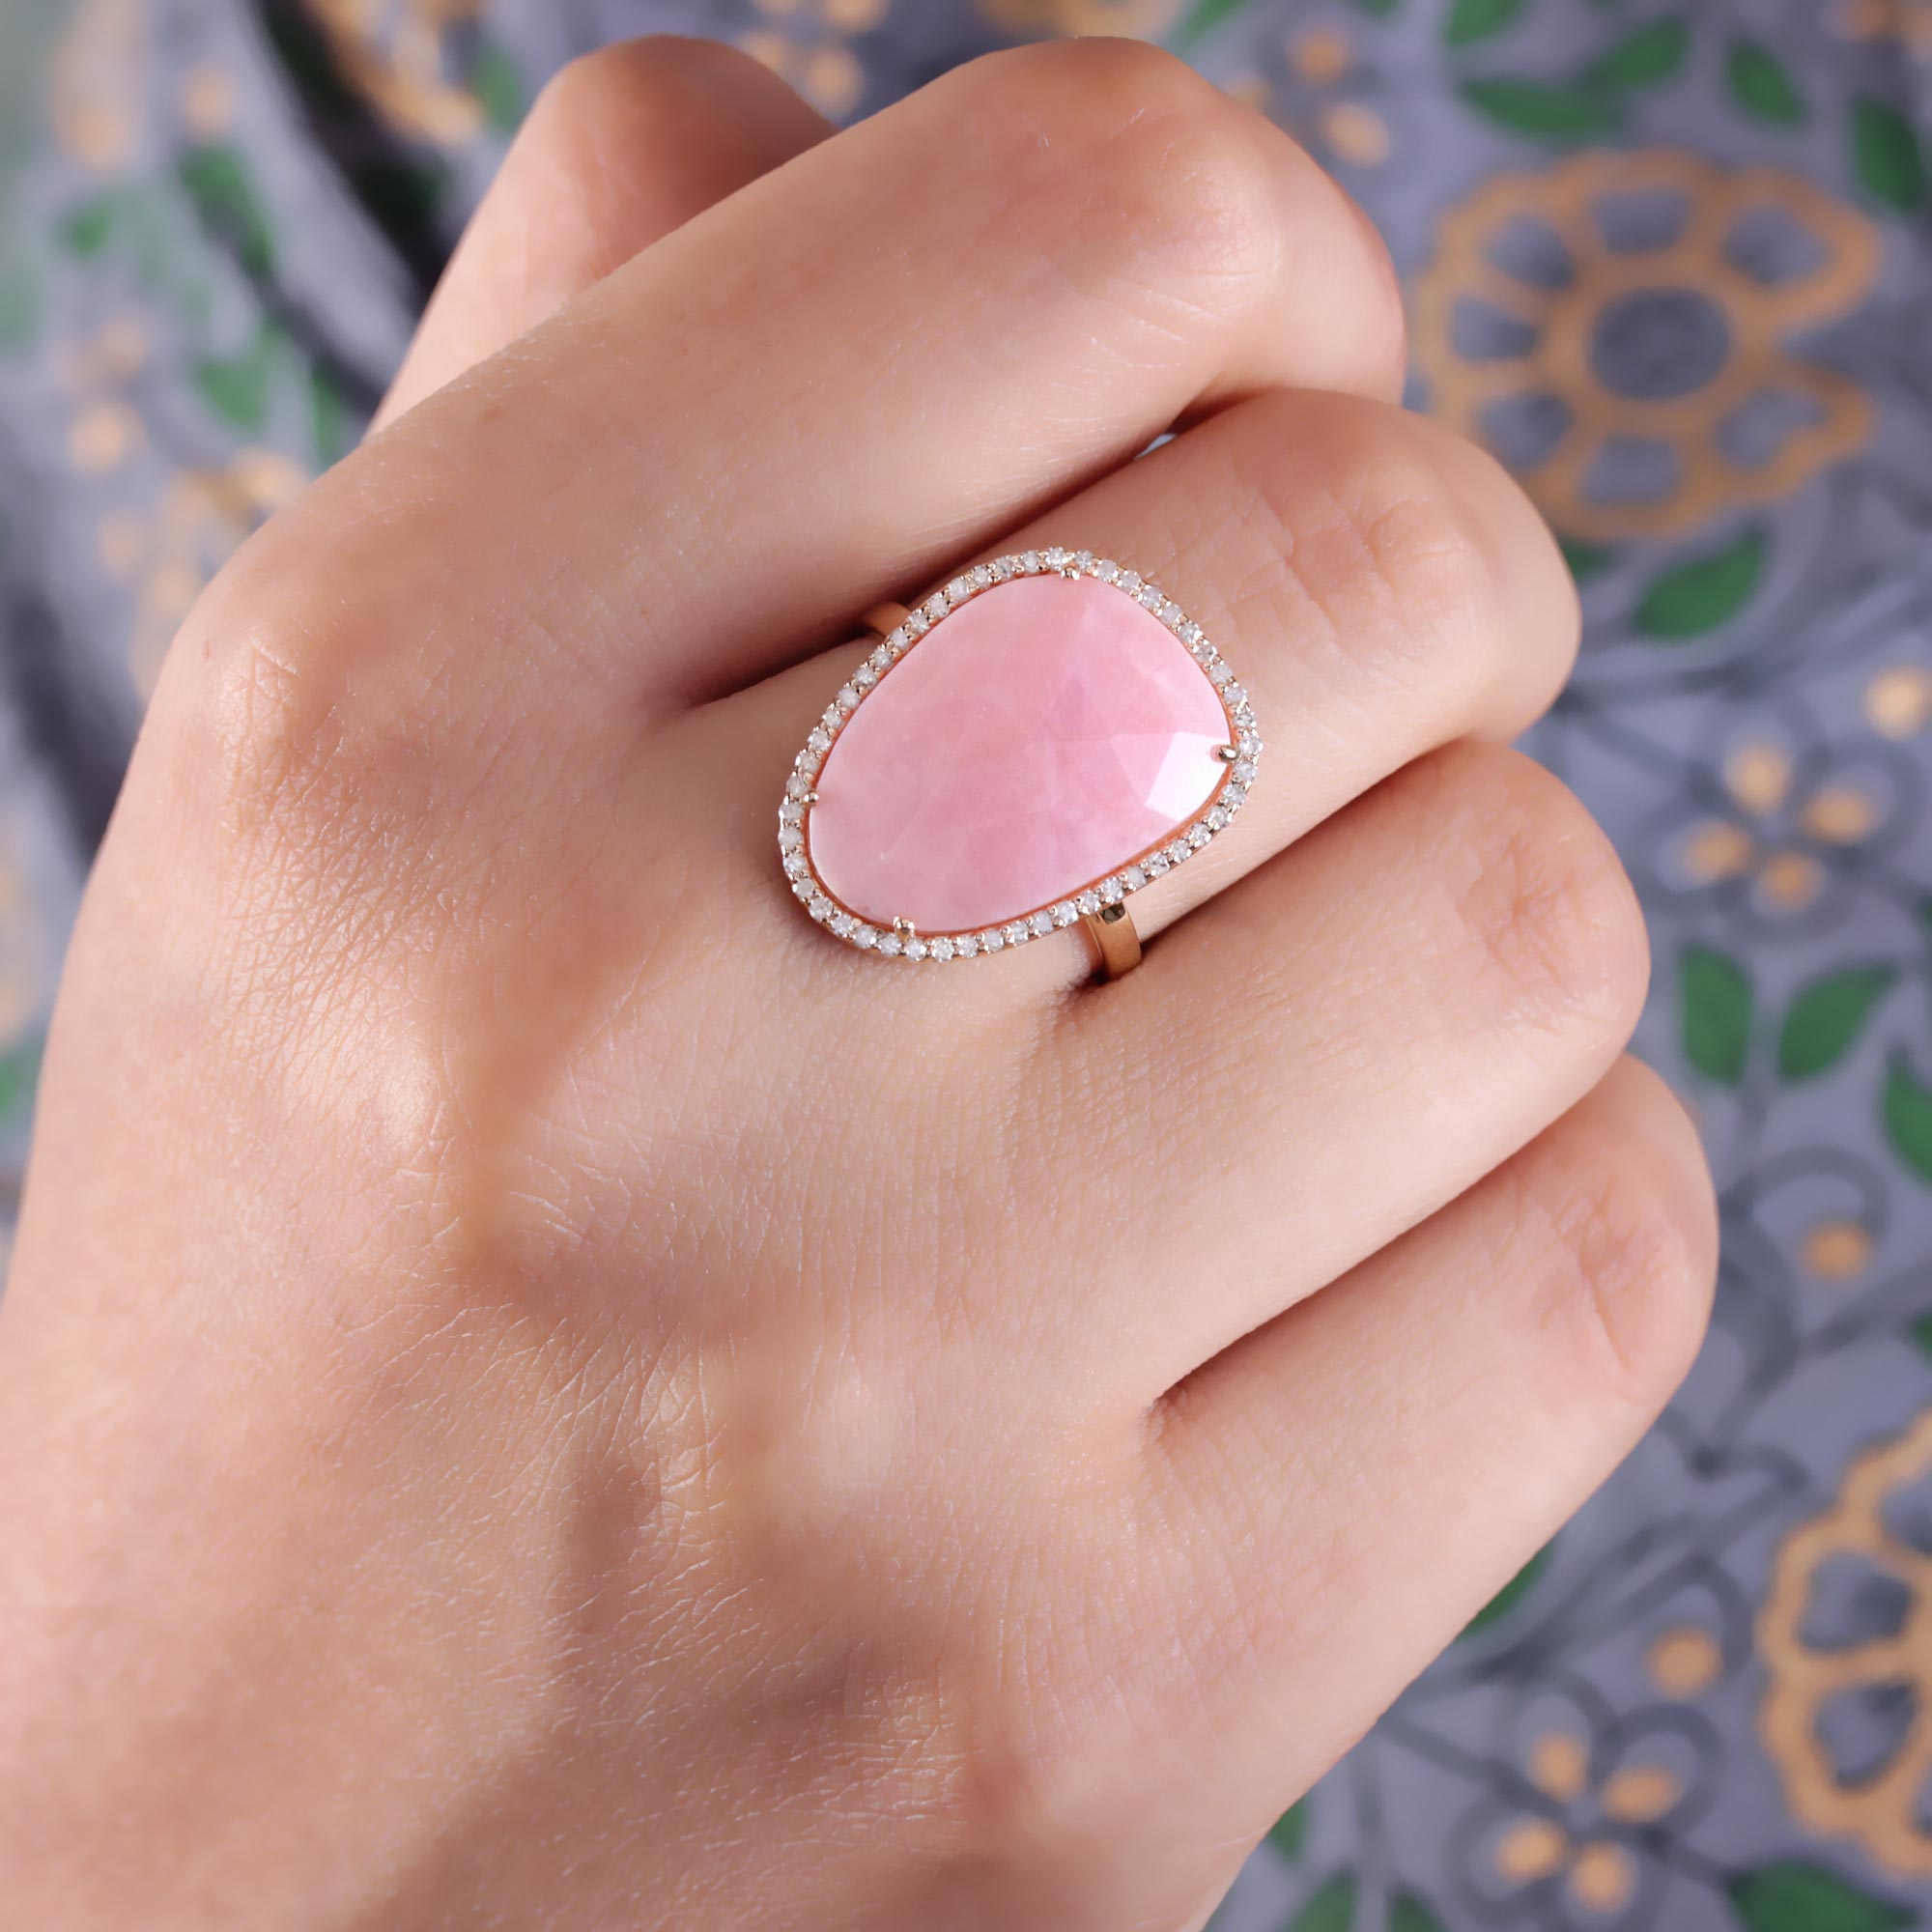 Natural Pave Diamond 14K Solid Gold Ring Pink Opal Gemstone Jewelry